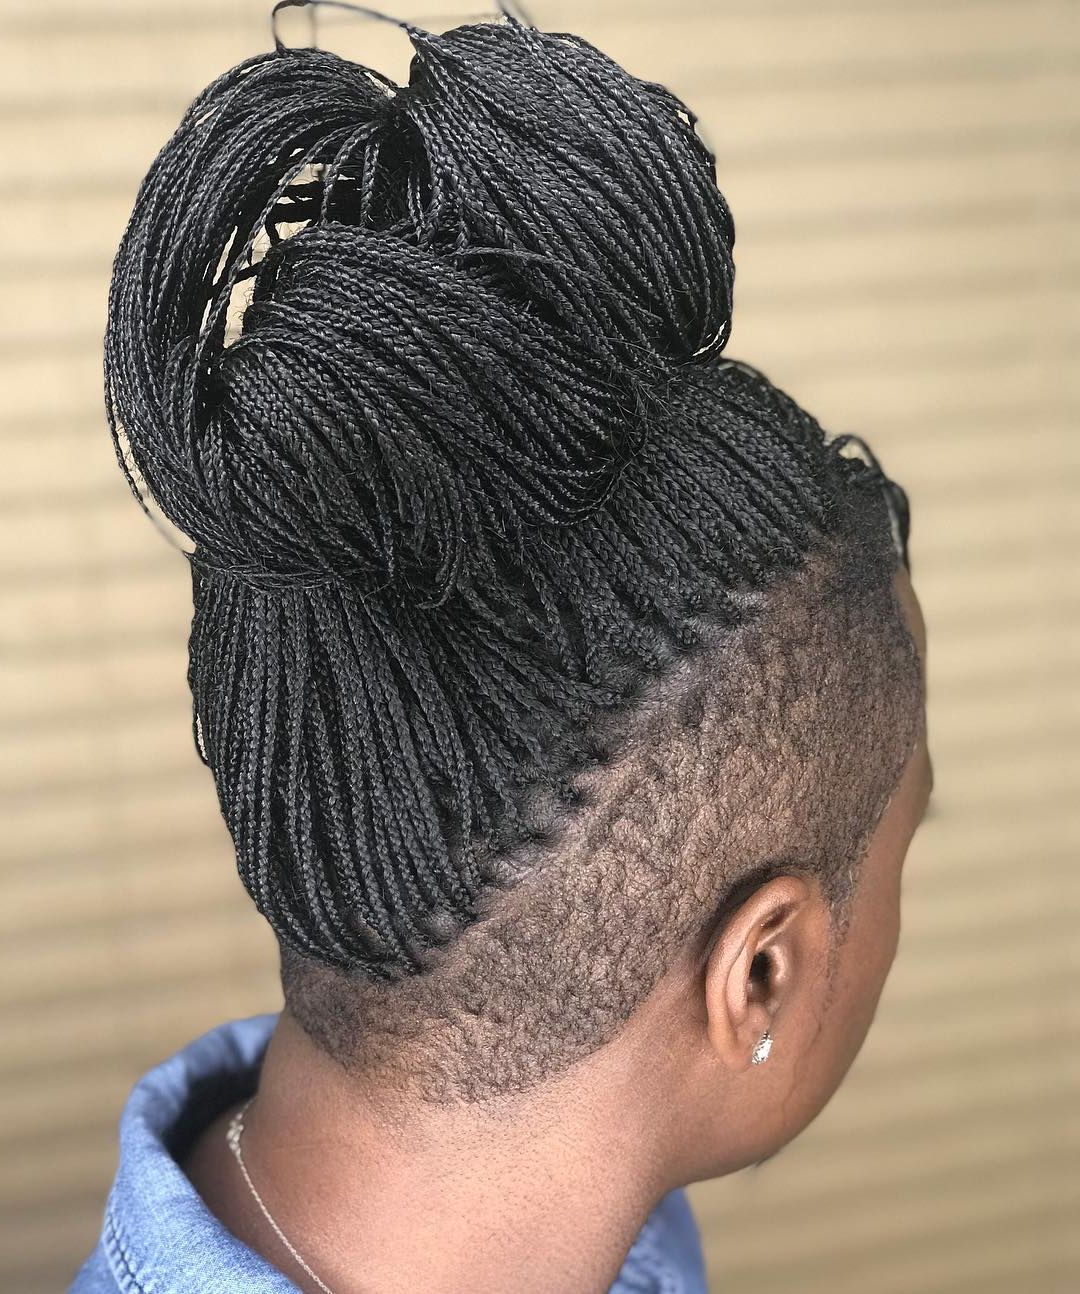 20 Superb Braids With Shaved Sides Worth Copying Intended For Trendy Mohawk Braid Hairstyles With Extensions (View 7 of 20)